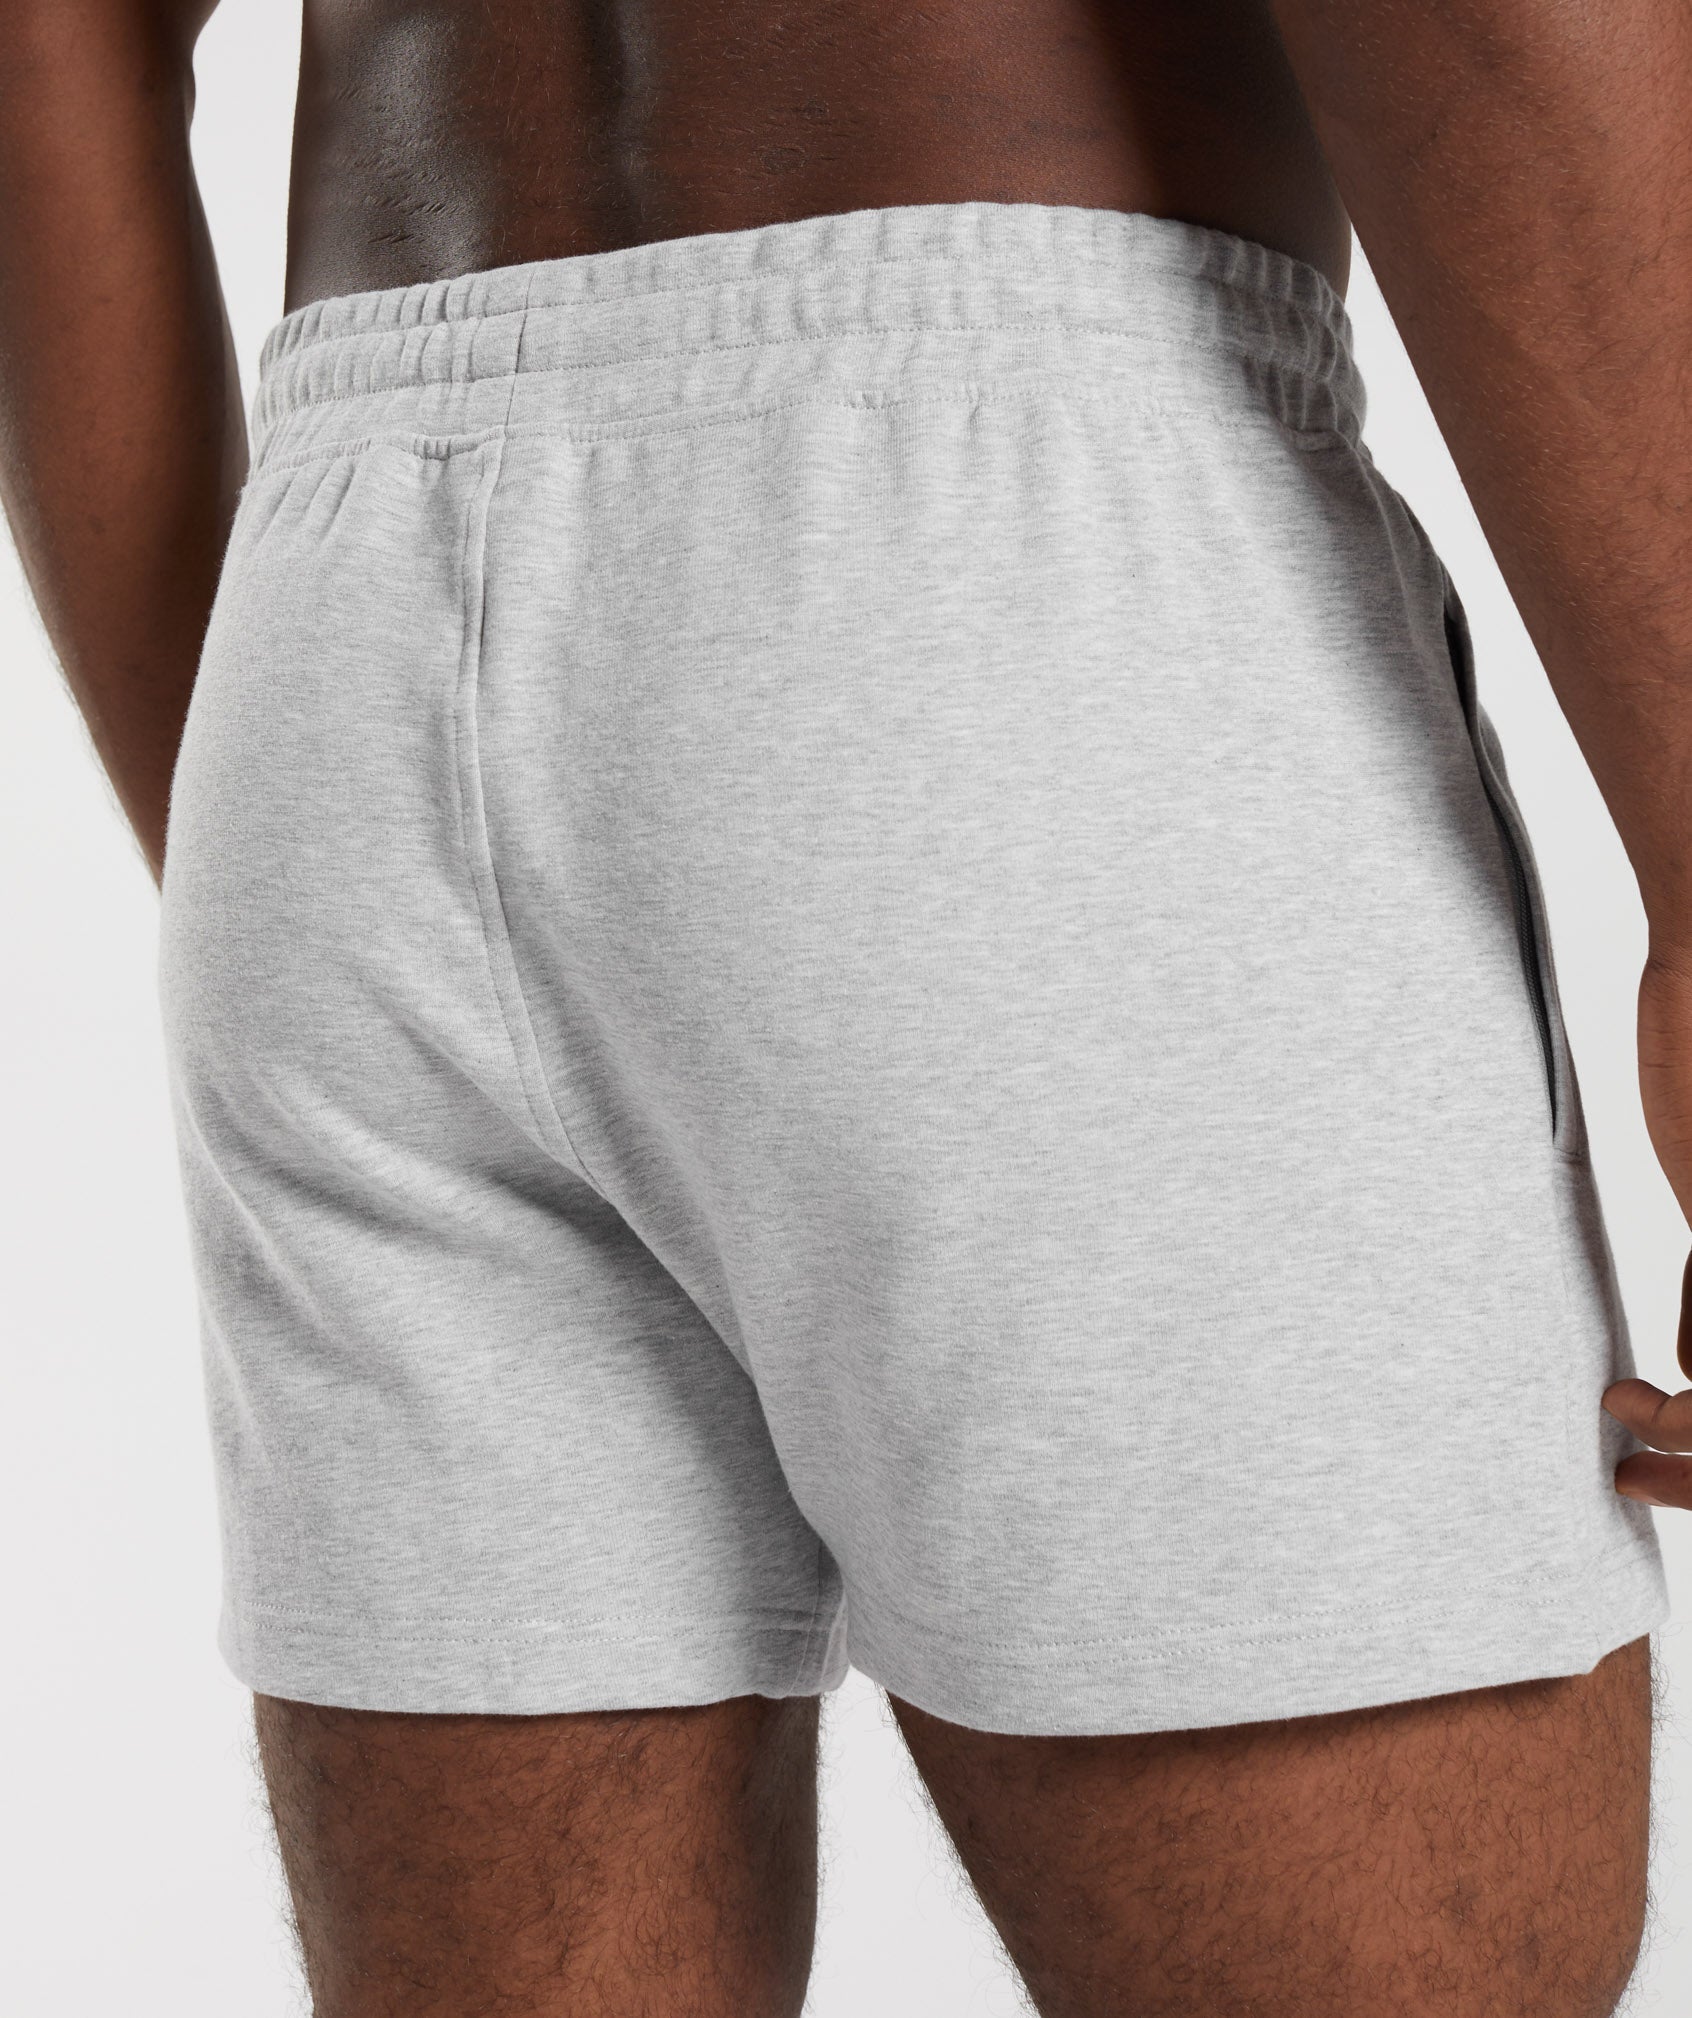 React 5" Shorts in Light Grey Core Marl - view 5